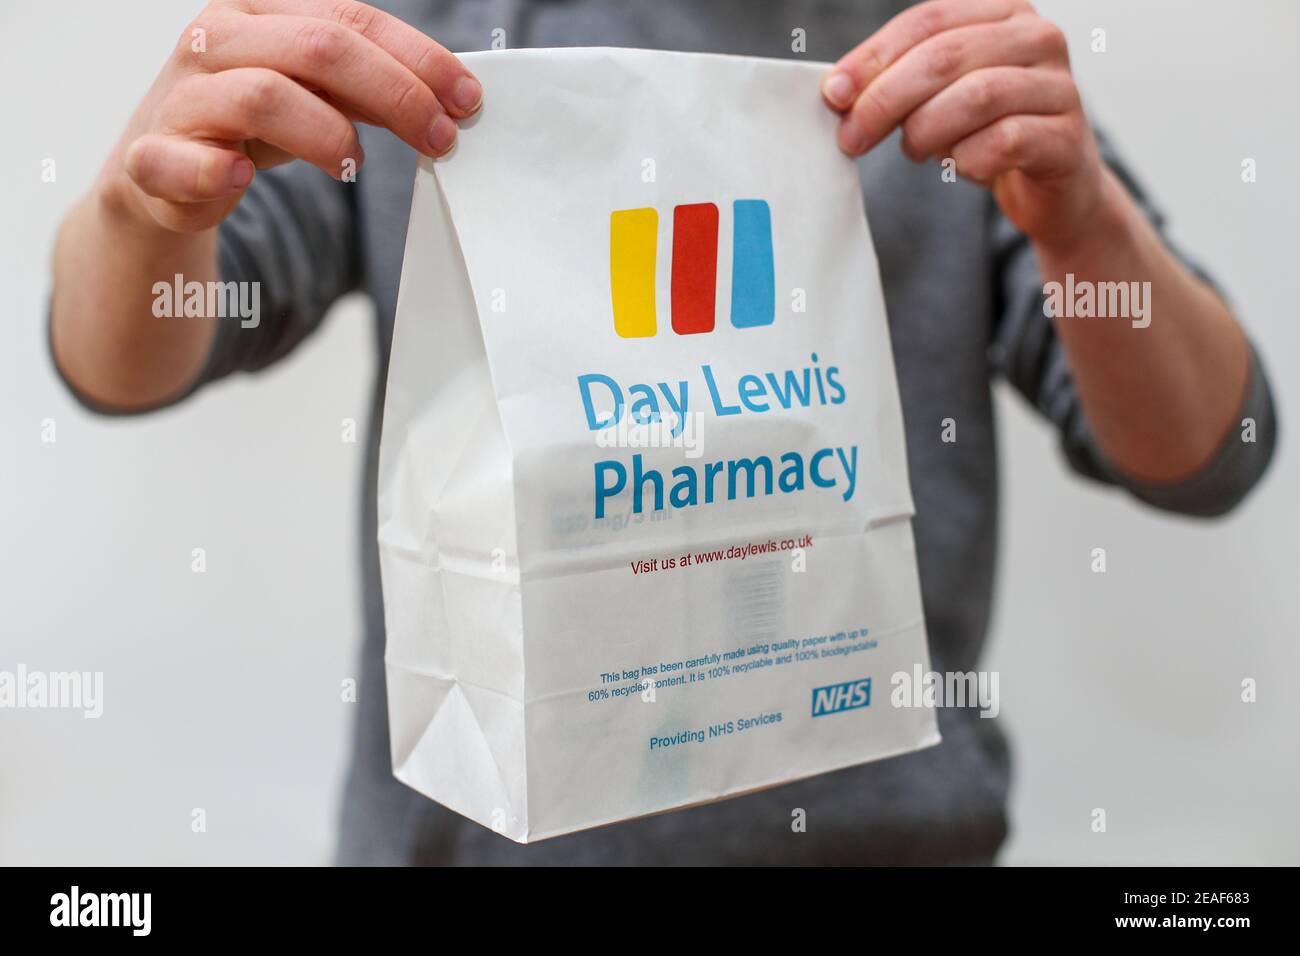 A man handing over an NHS prescription from Day Lewis pharmacy. Stock Photo